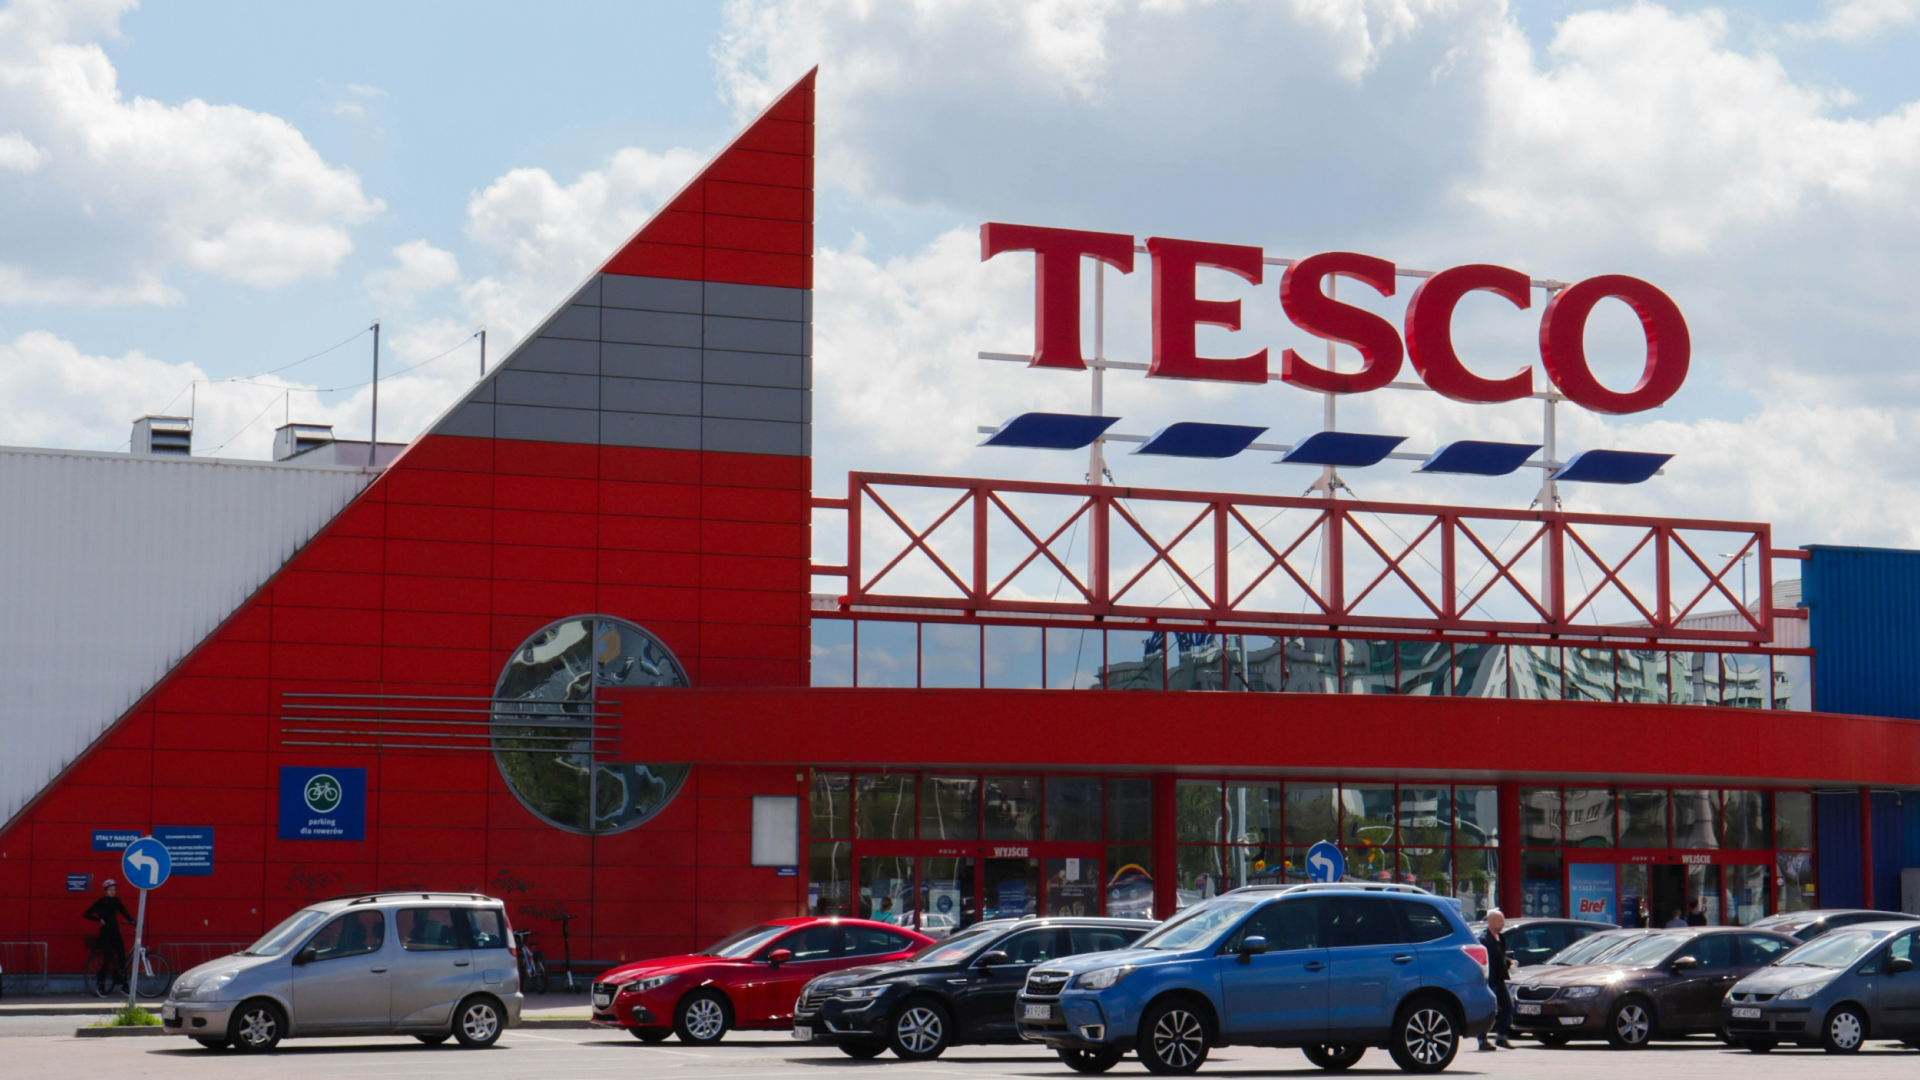 Tesco Launches New Online Marketplace Featuring 9,000 Products